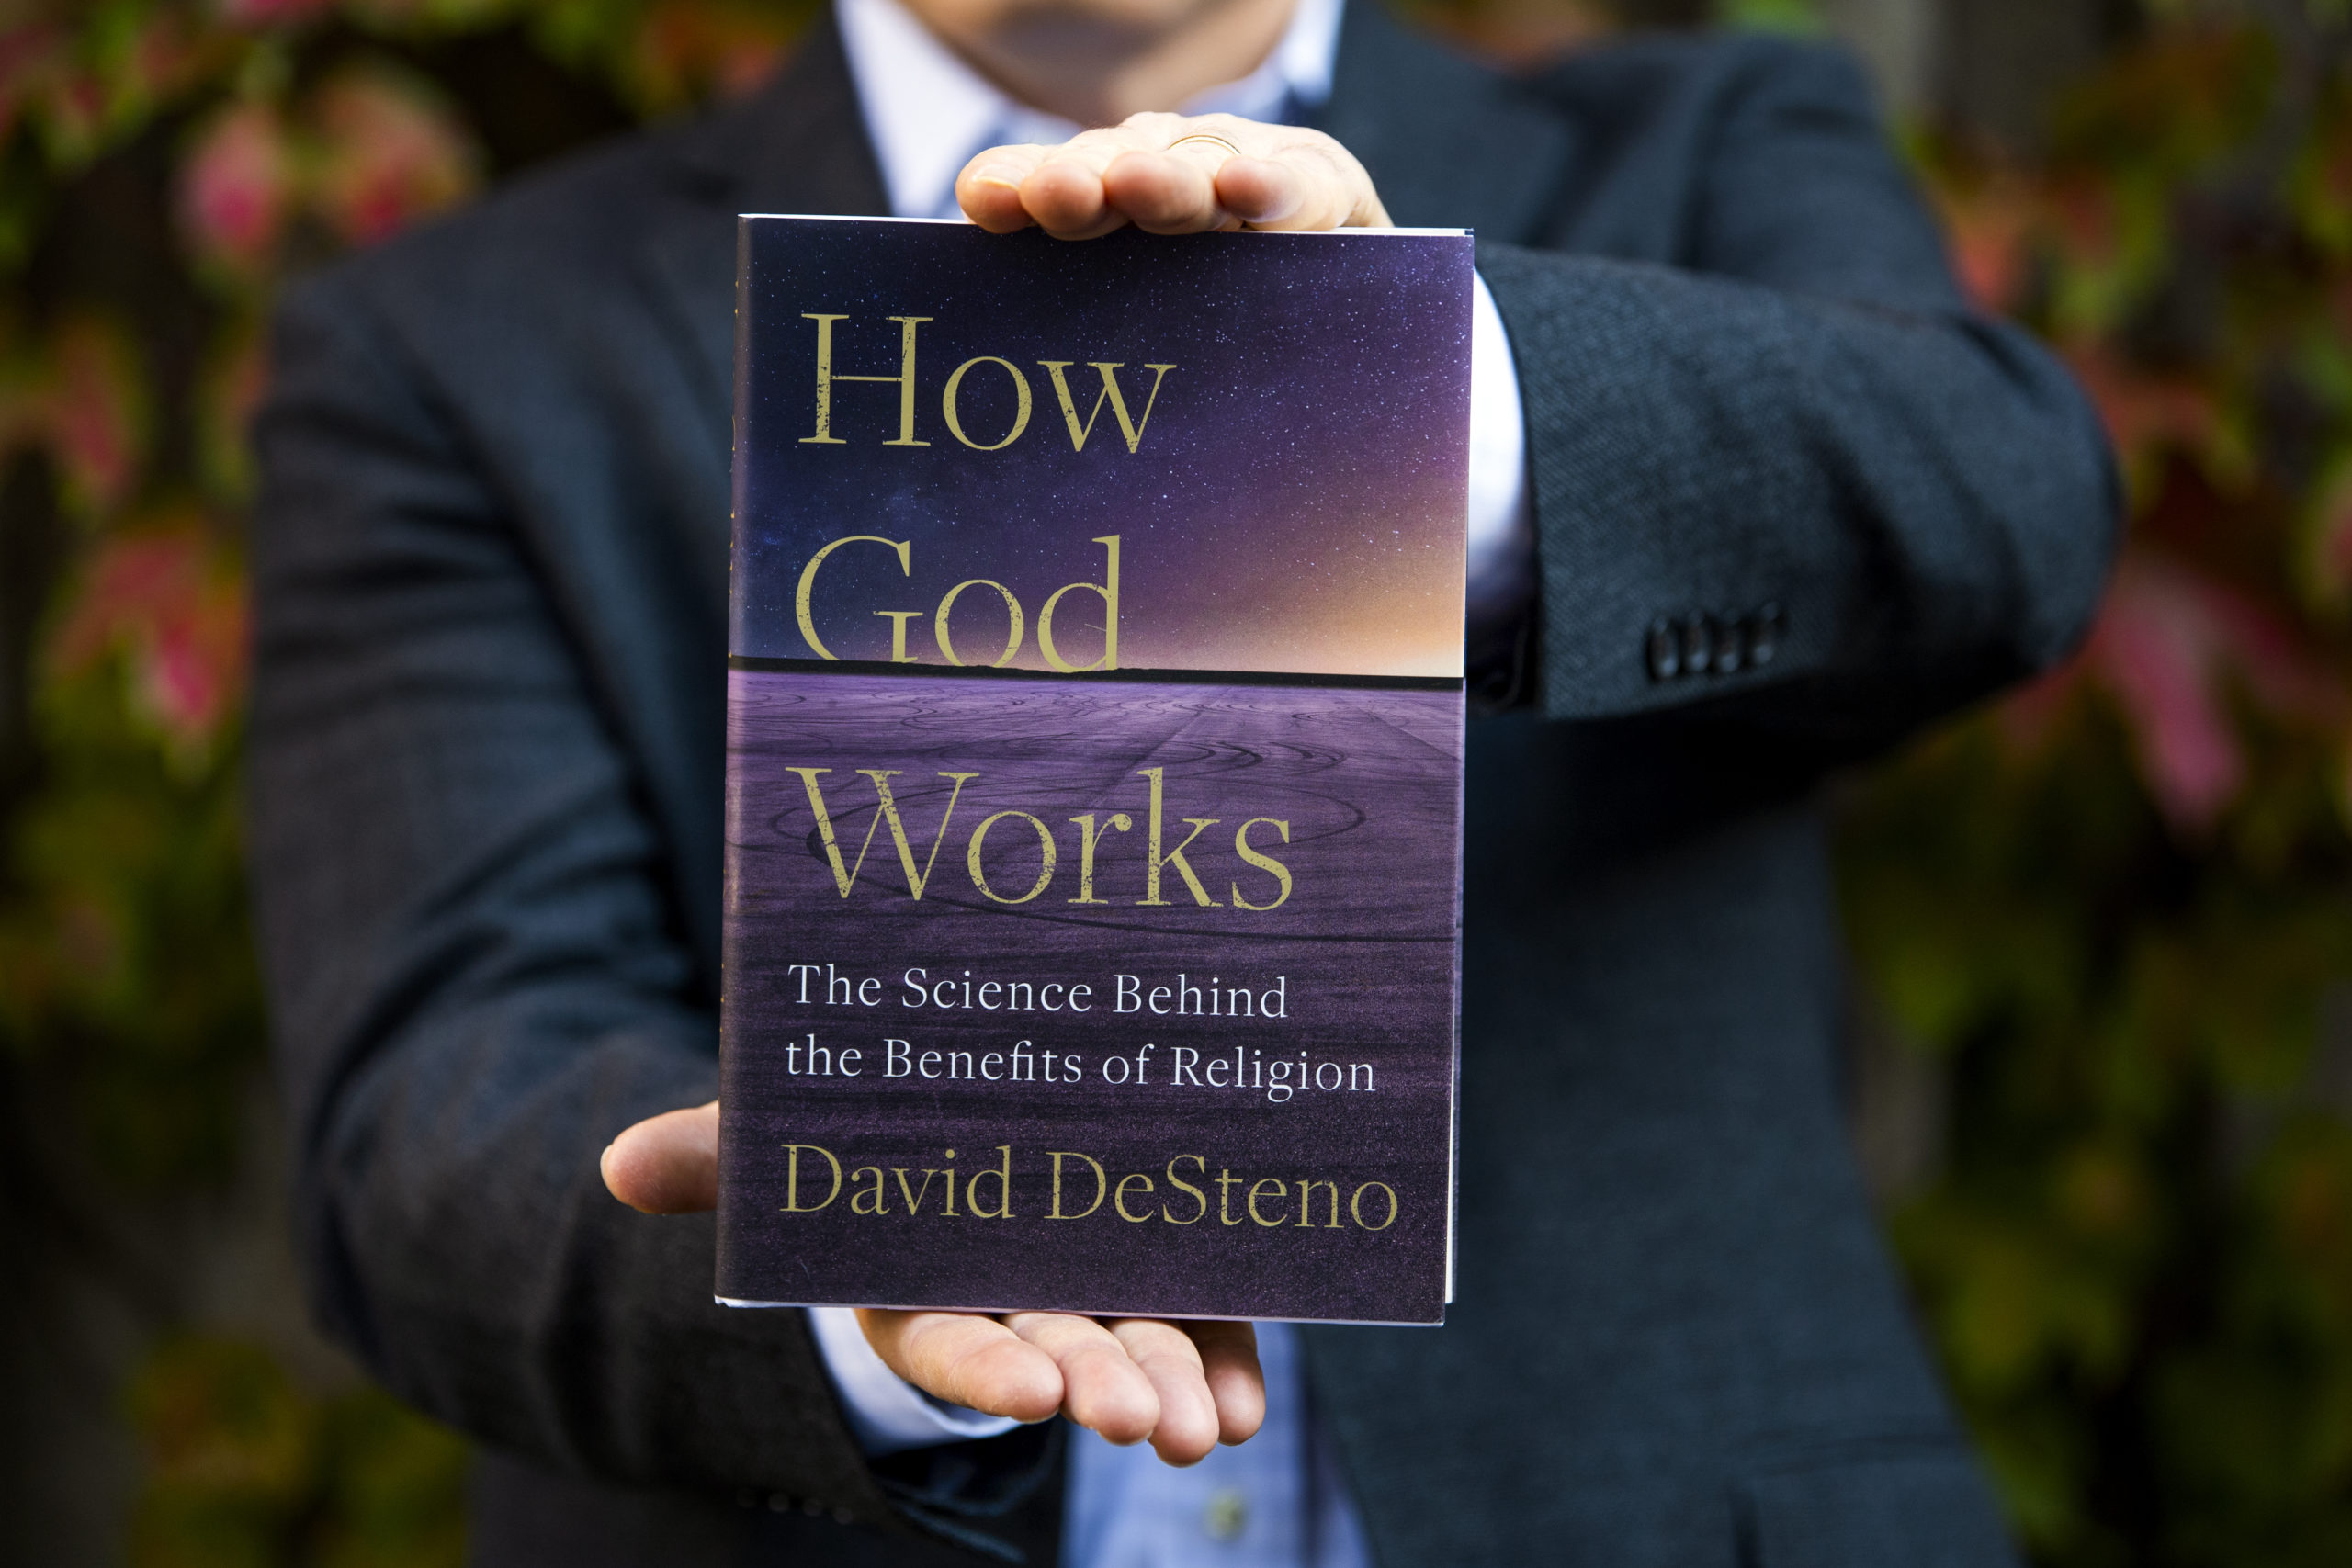 David DeSteno holds a copy of his new book, "How God Works."